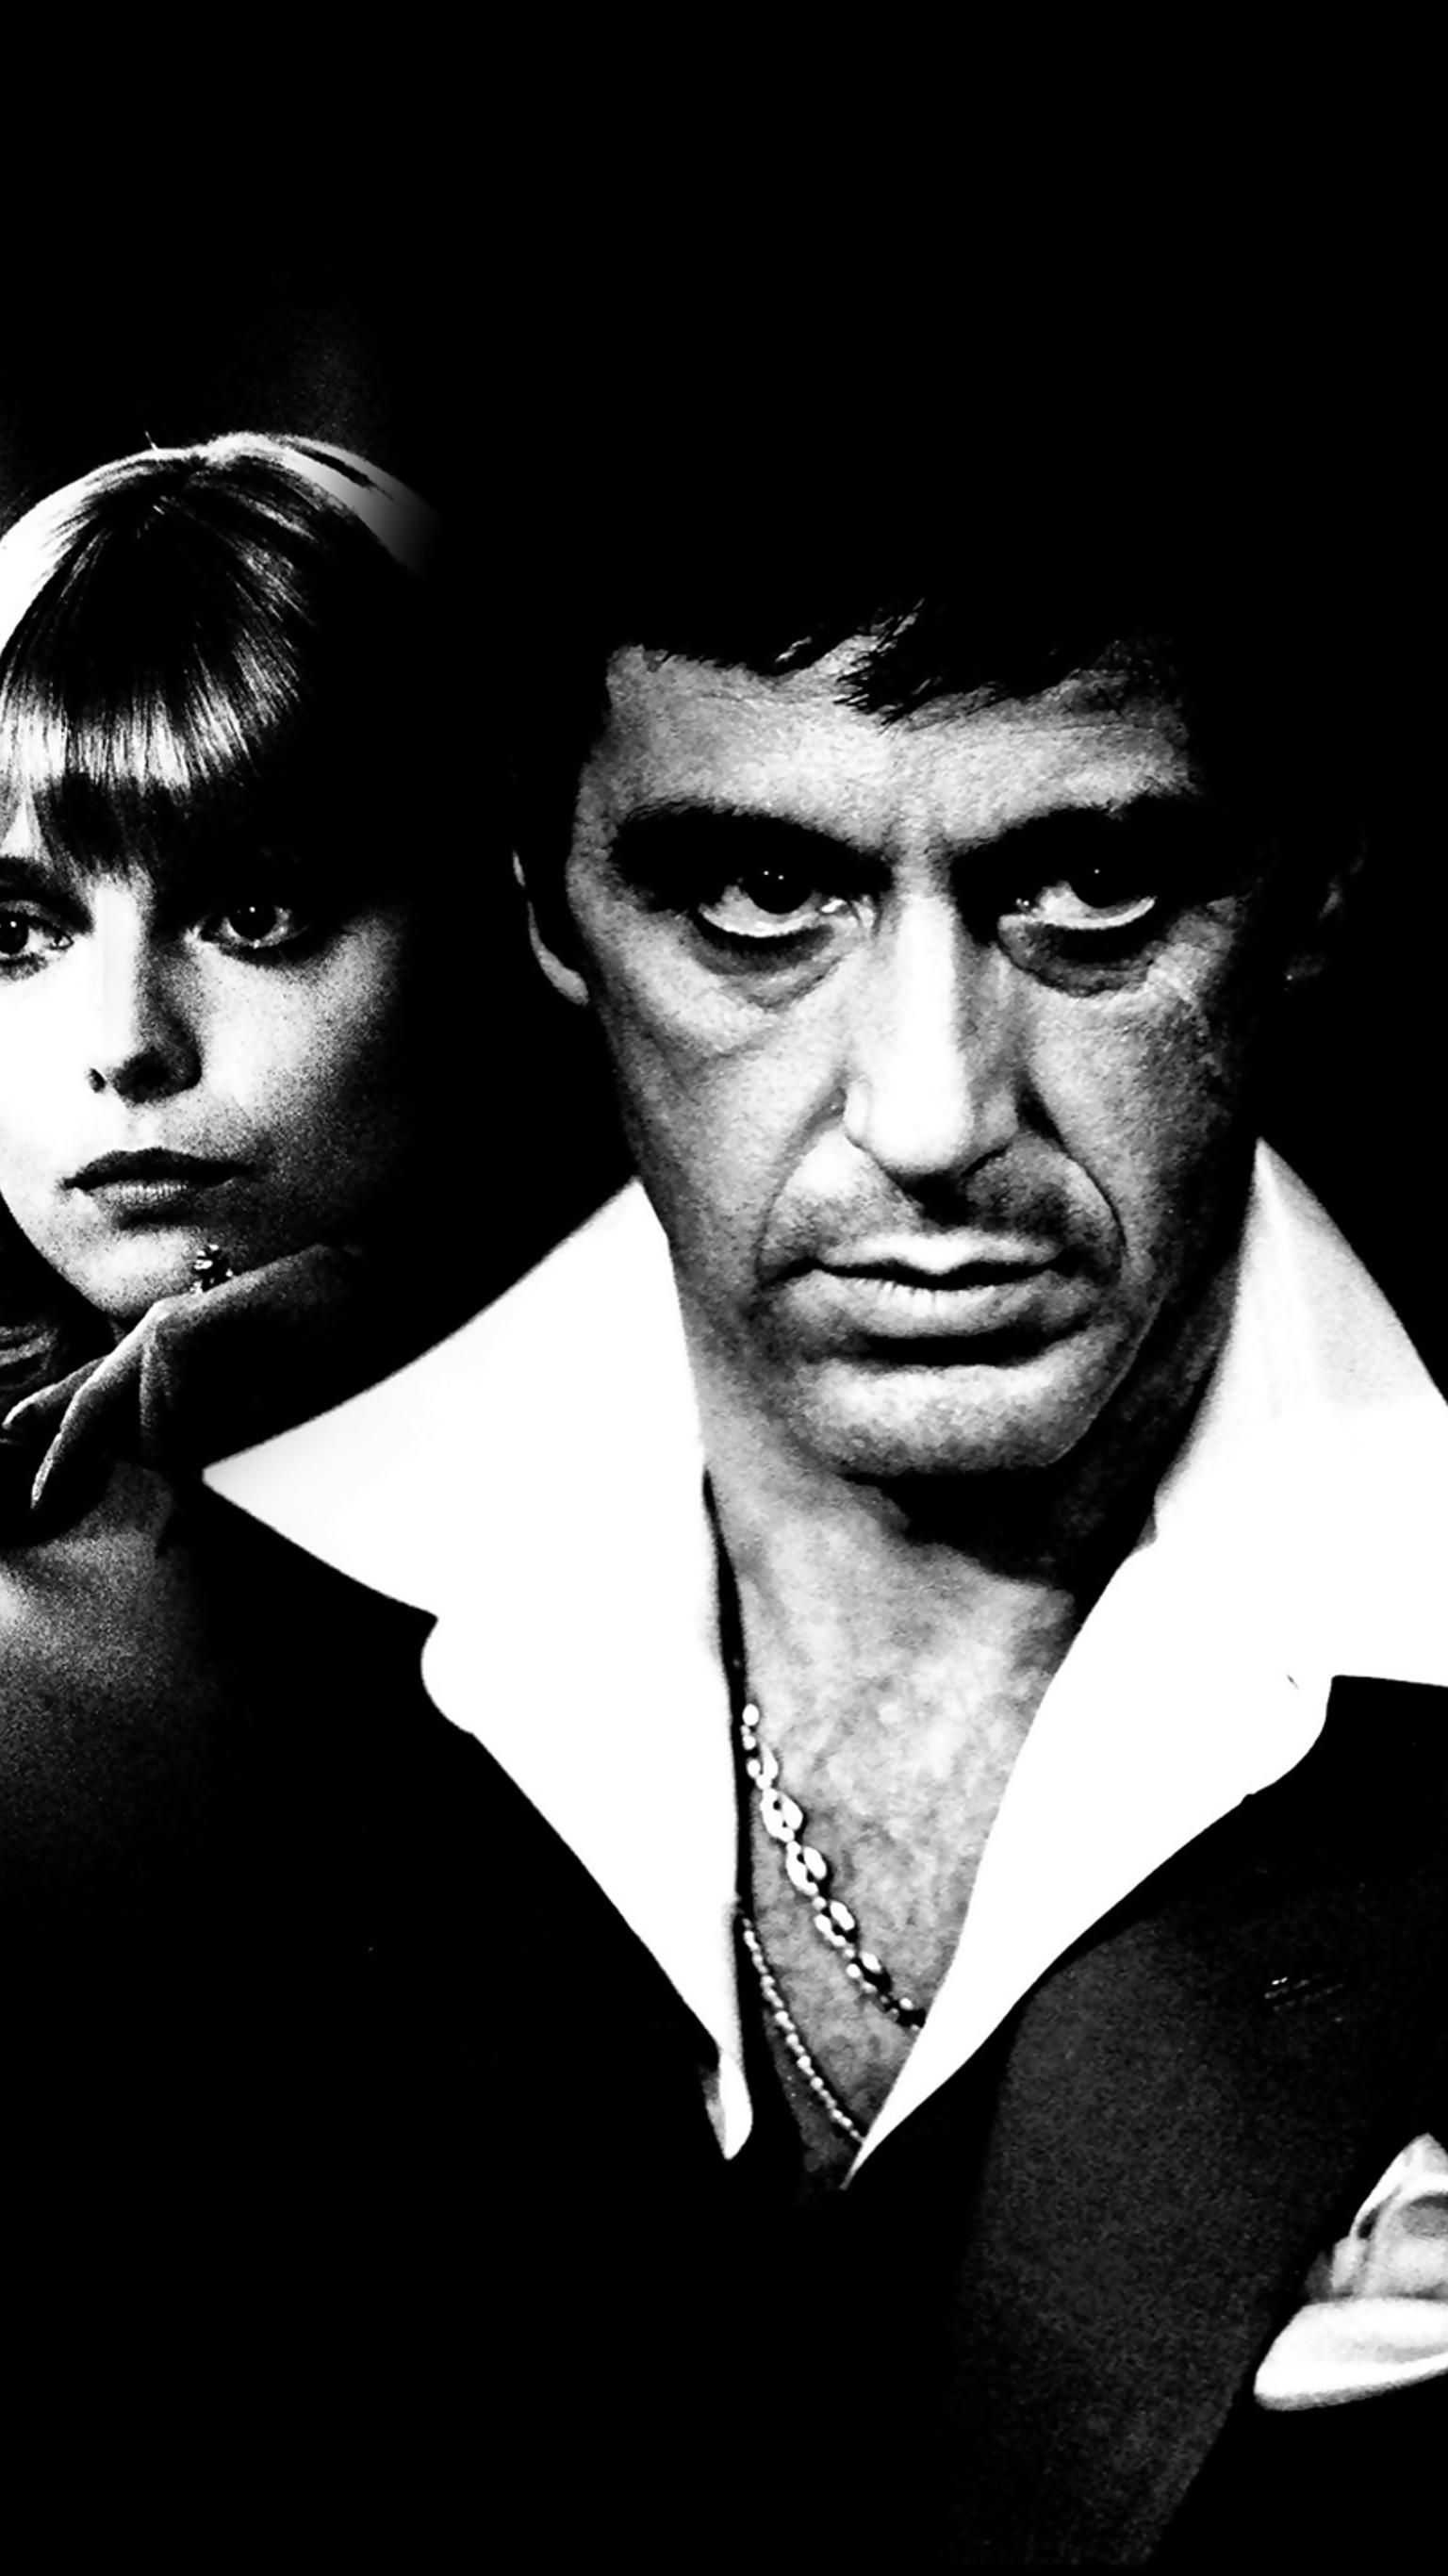 HD wallpaper, Samsung Hd Scarface Background Image, Symbol Of Ambition, 1540X2740 Hd Phone, Iconic Wallpaper, Scarface Movie